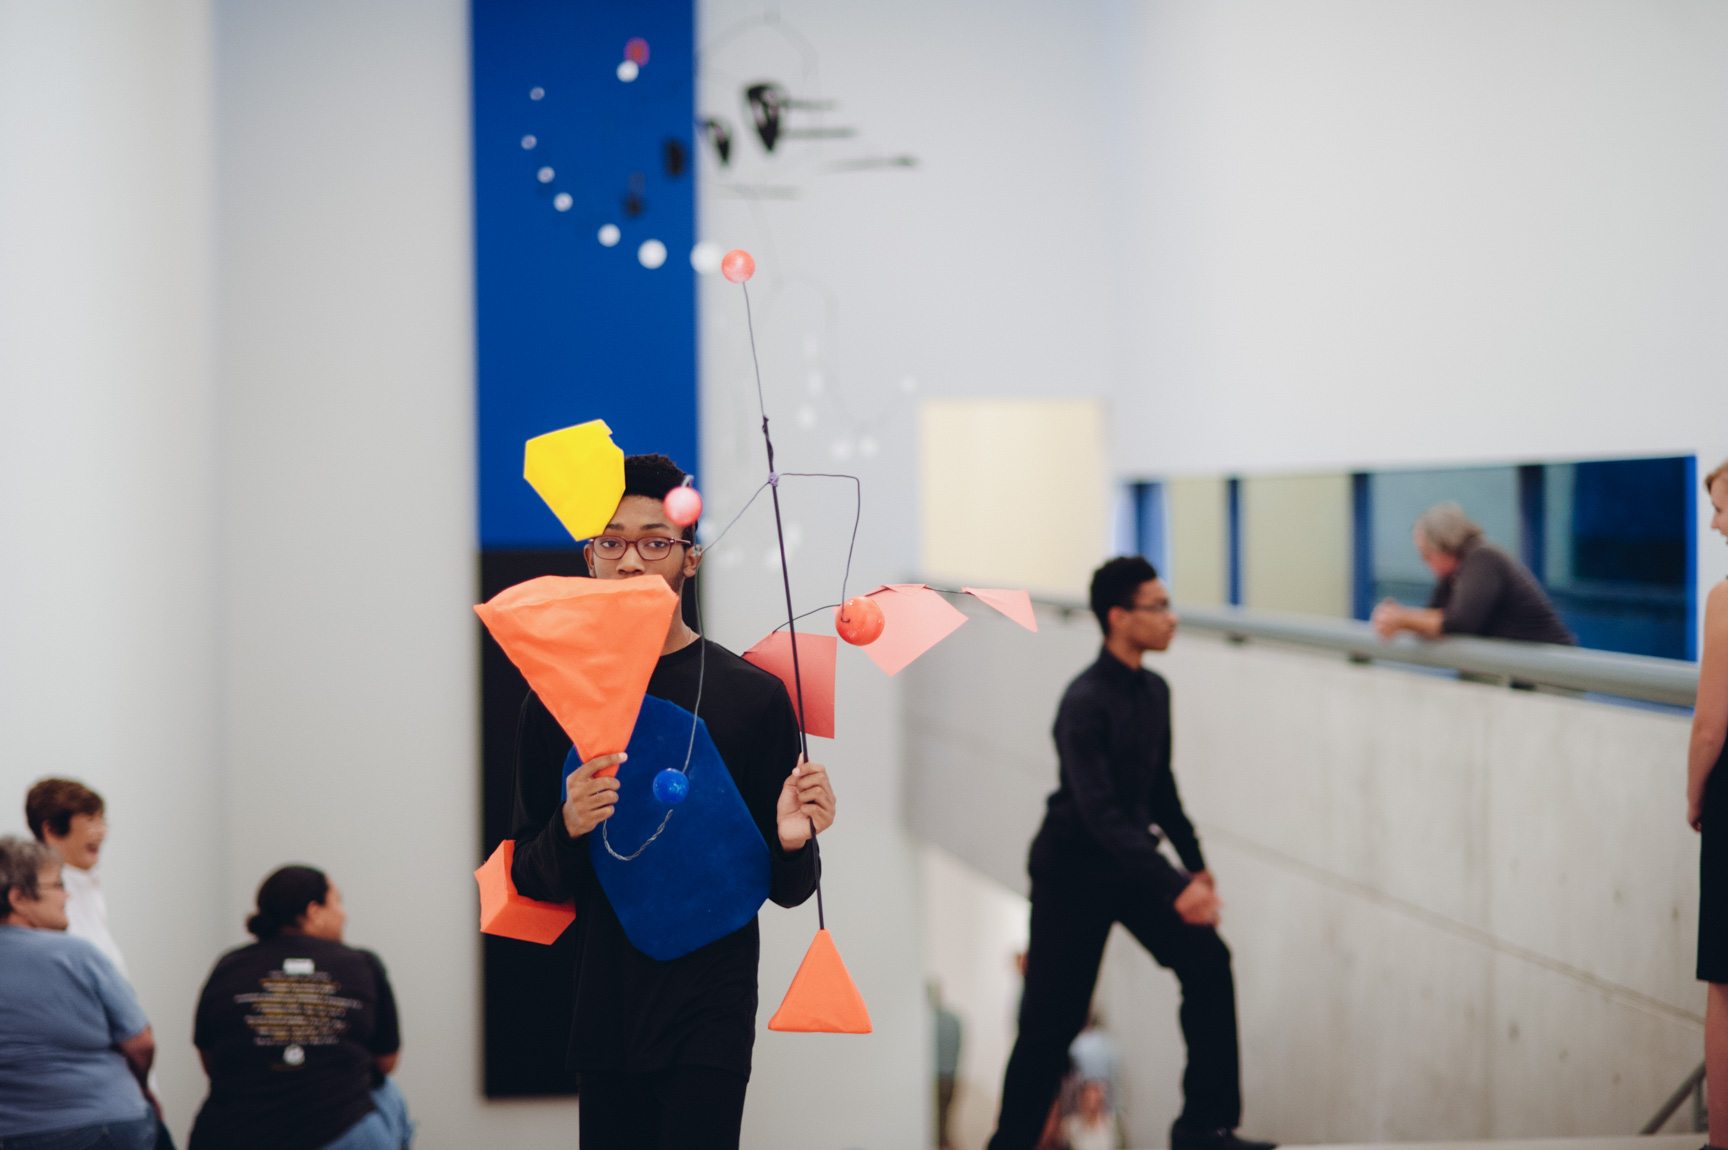 A student performs for an audience in the Main Gallery holding mobile inspired by Calder's work.